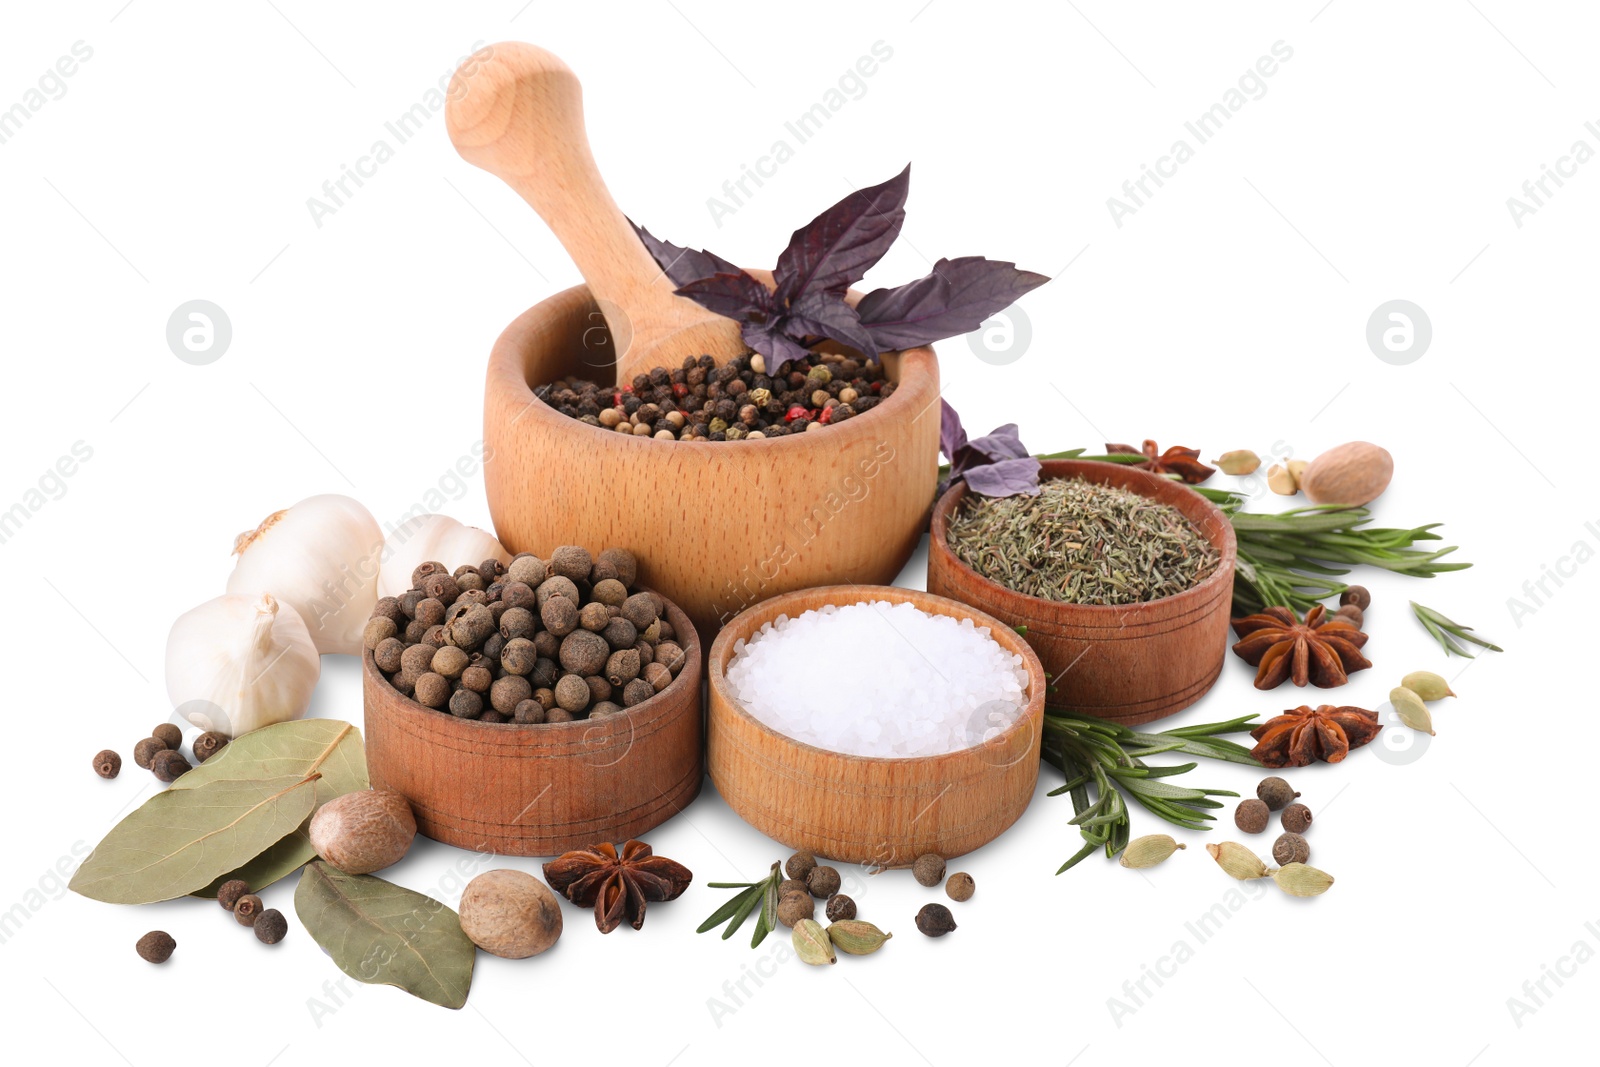 Photo of Mortar with pestle and different spices on white background